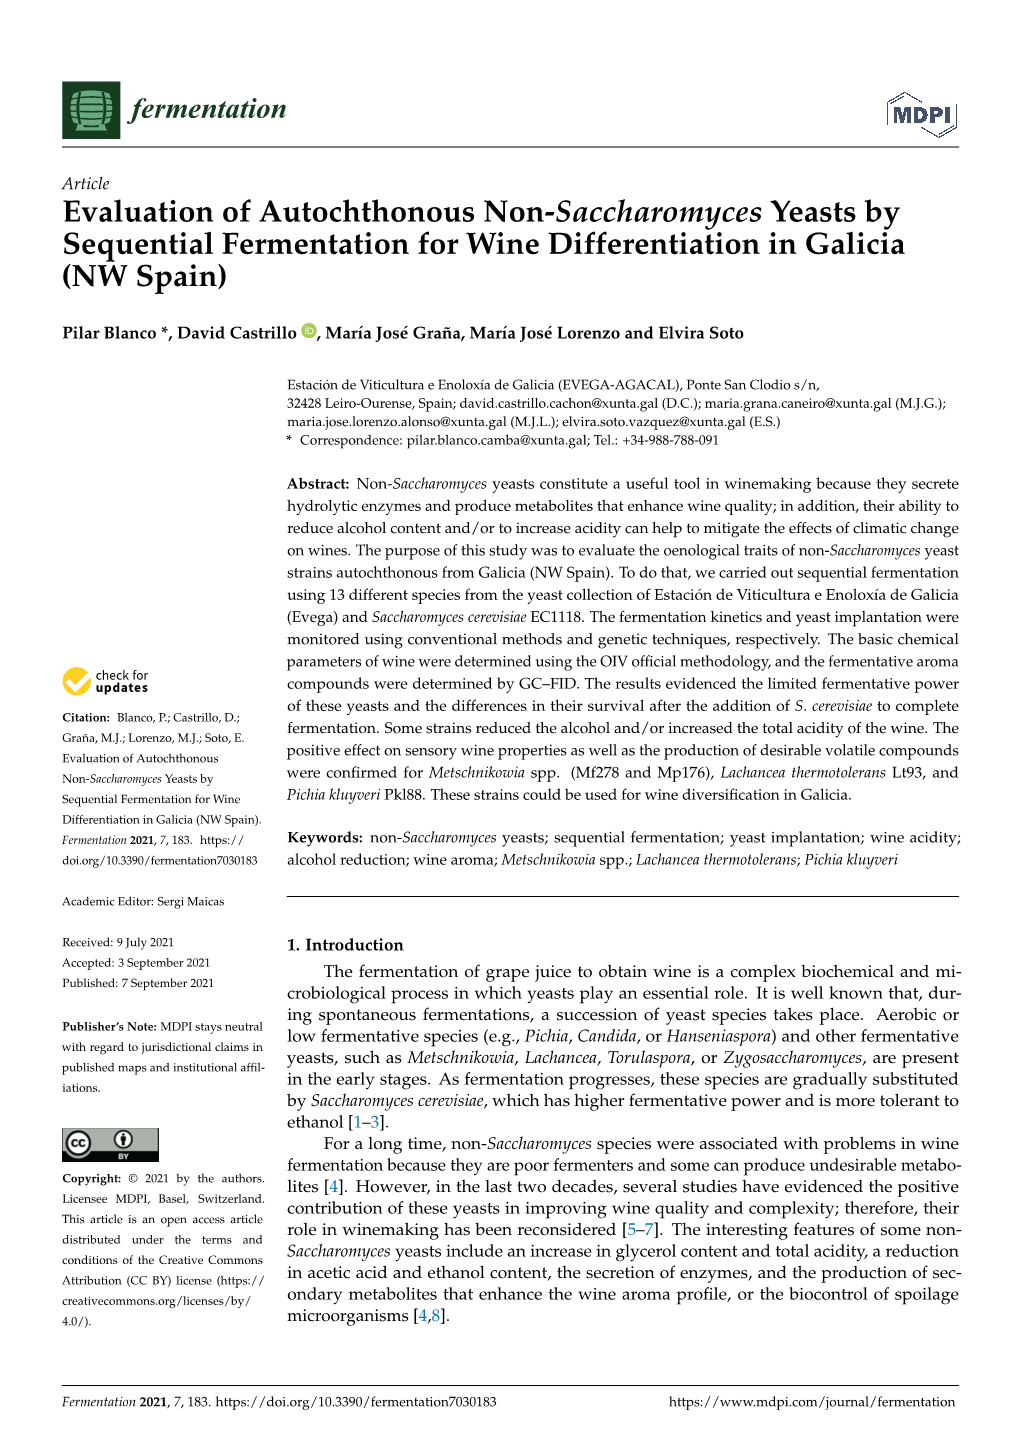 Evaluation of Autochthonous Non-Saccharomyces Yeasts by Sequential Fermentation for Wine Differentiation in Galicia (NW Spain)